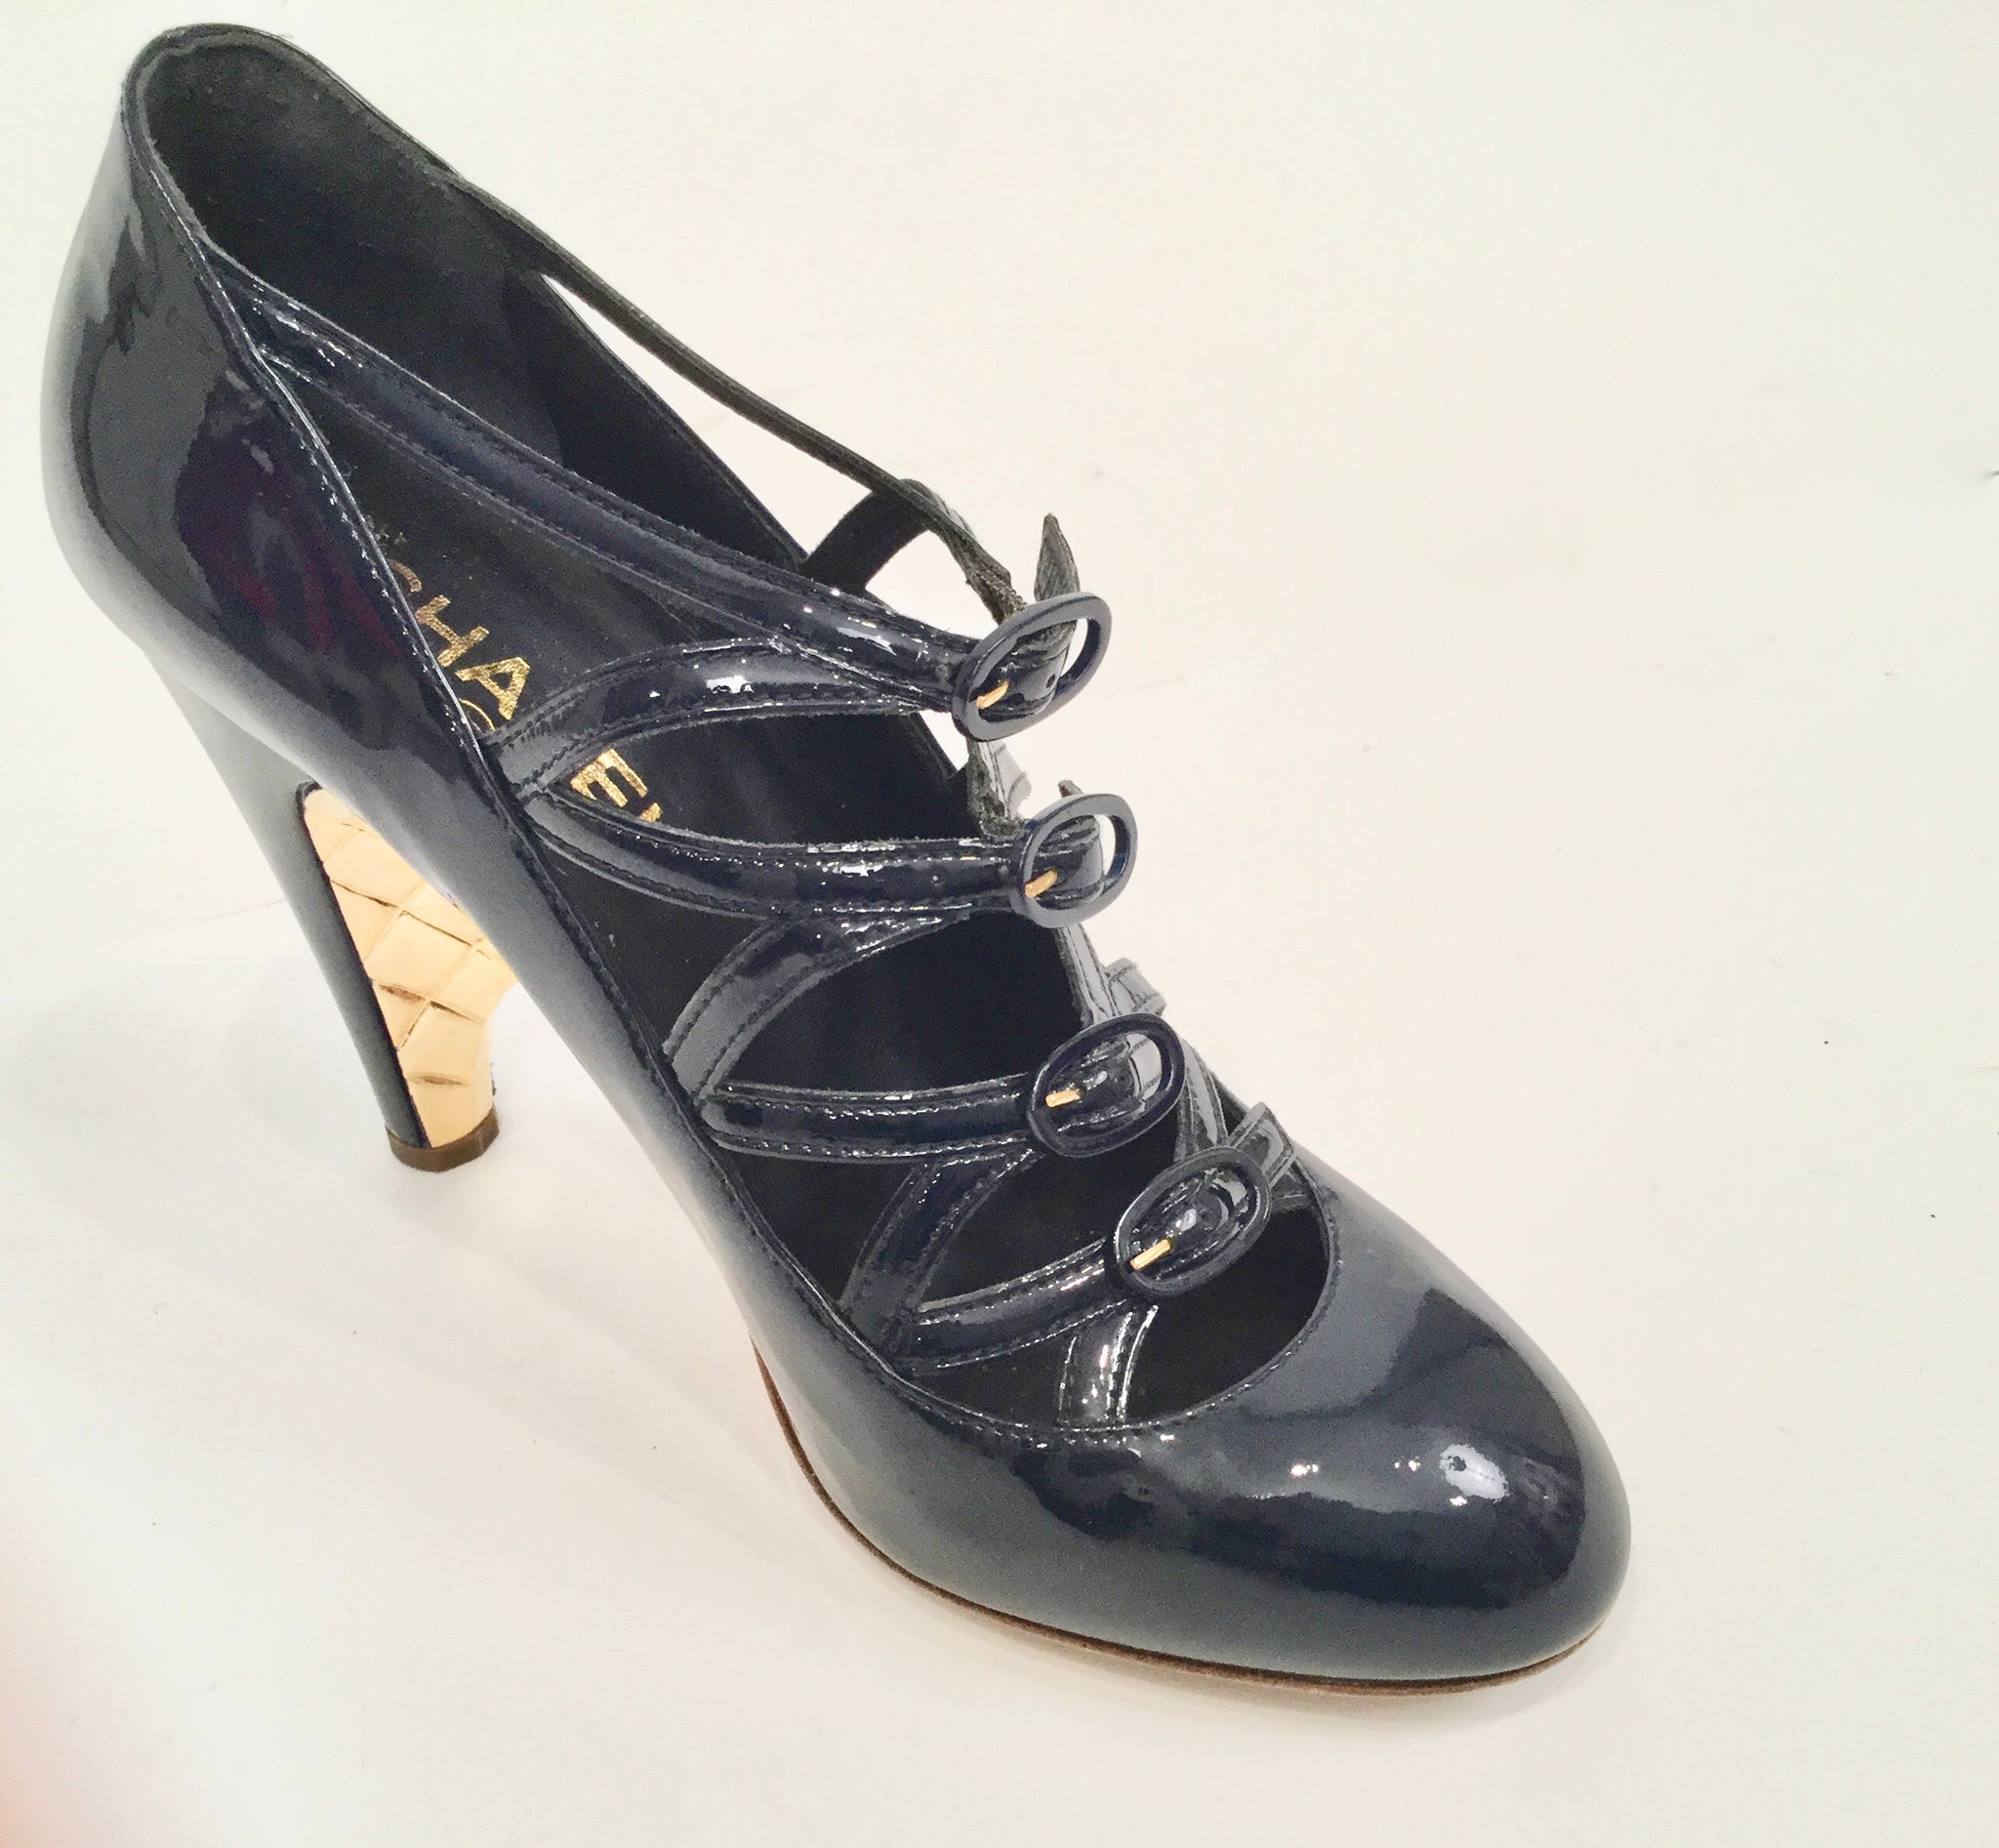 Chanel Navy Blue Patent Leather Quilted Gold Mary Jane Wedge Strap Heels 07A 2007 Fall Novelty Buckled Pumps EU 38 US 7/7.5